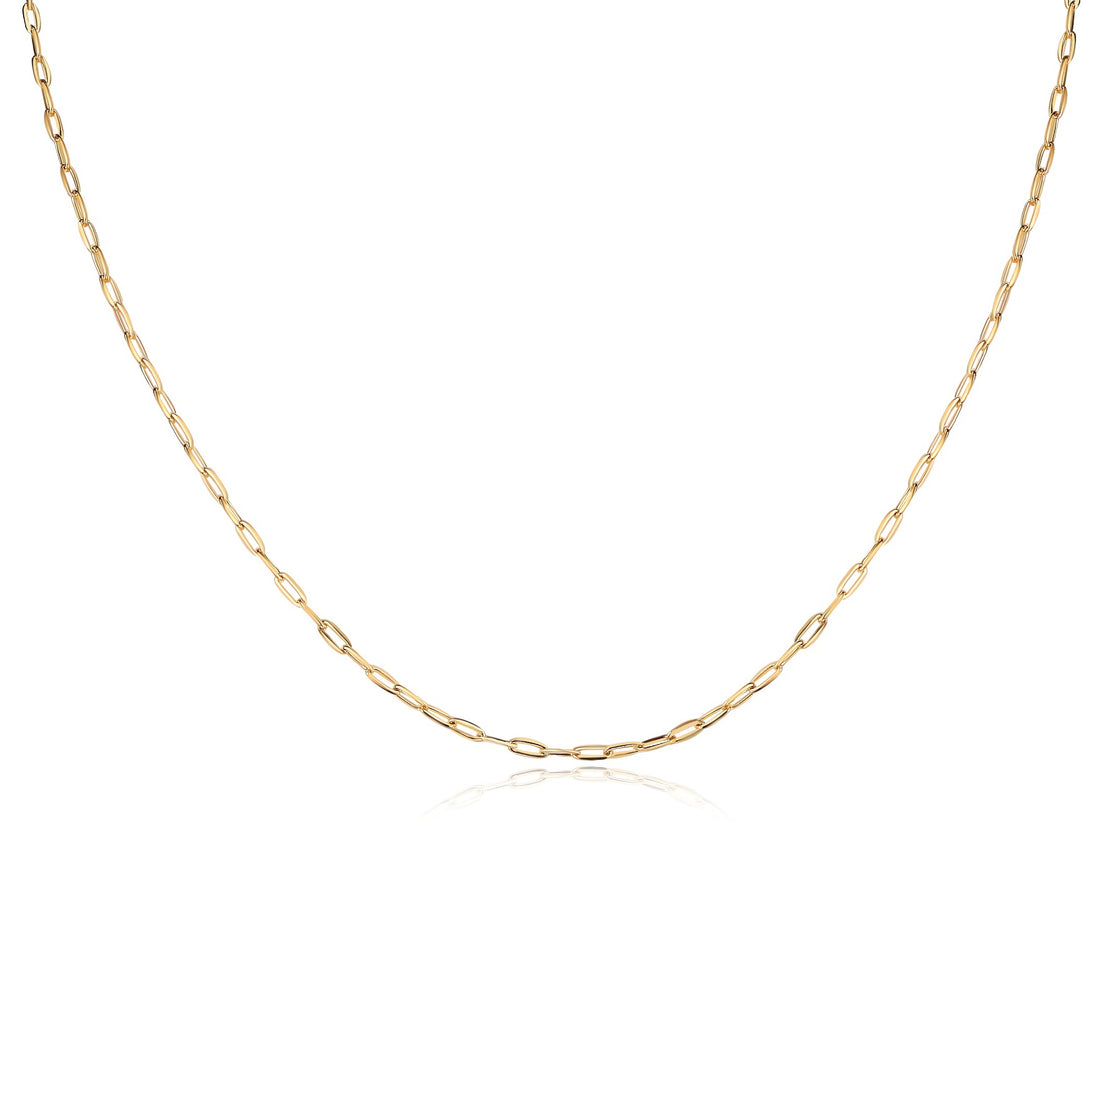 Sunday Necklace - Solid Gold